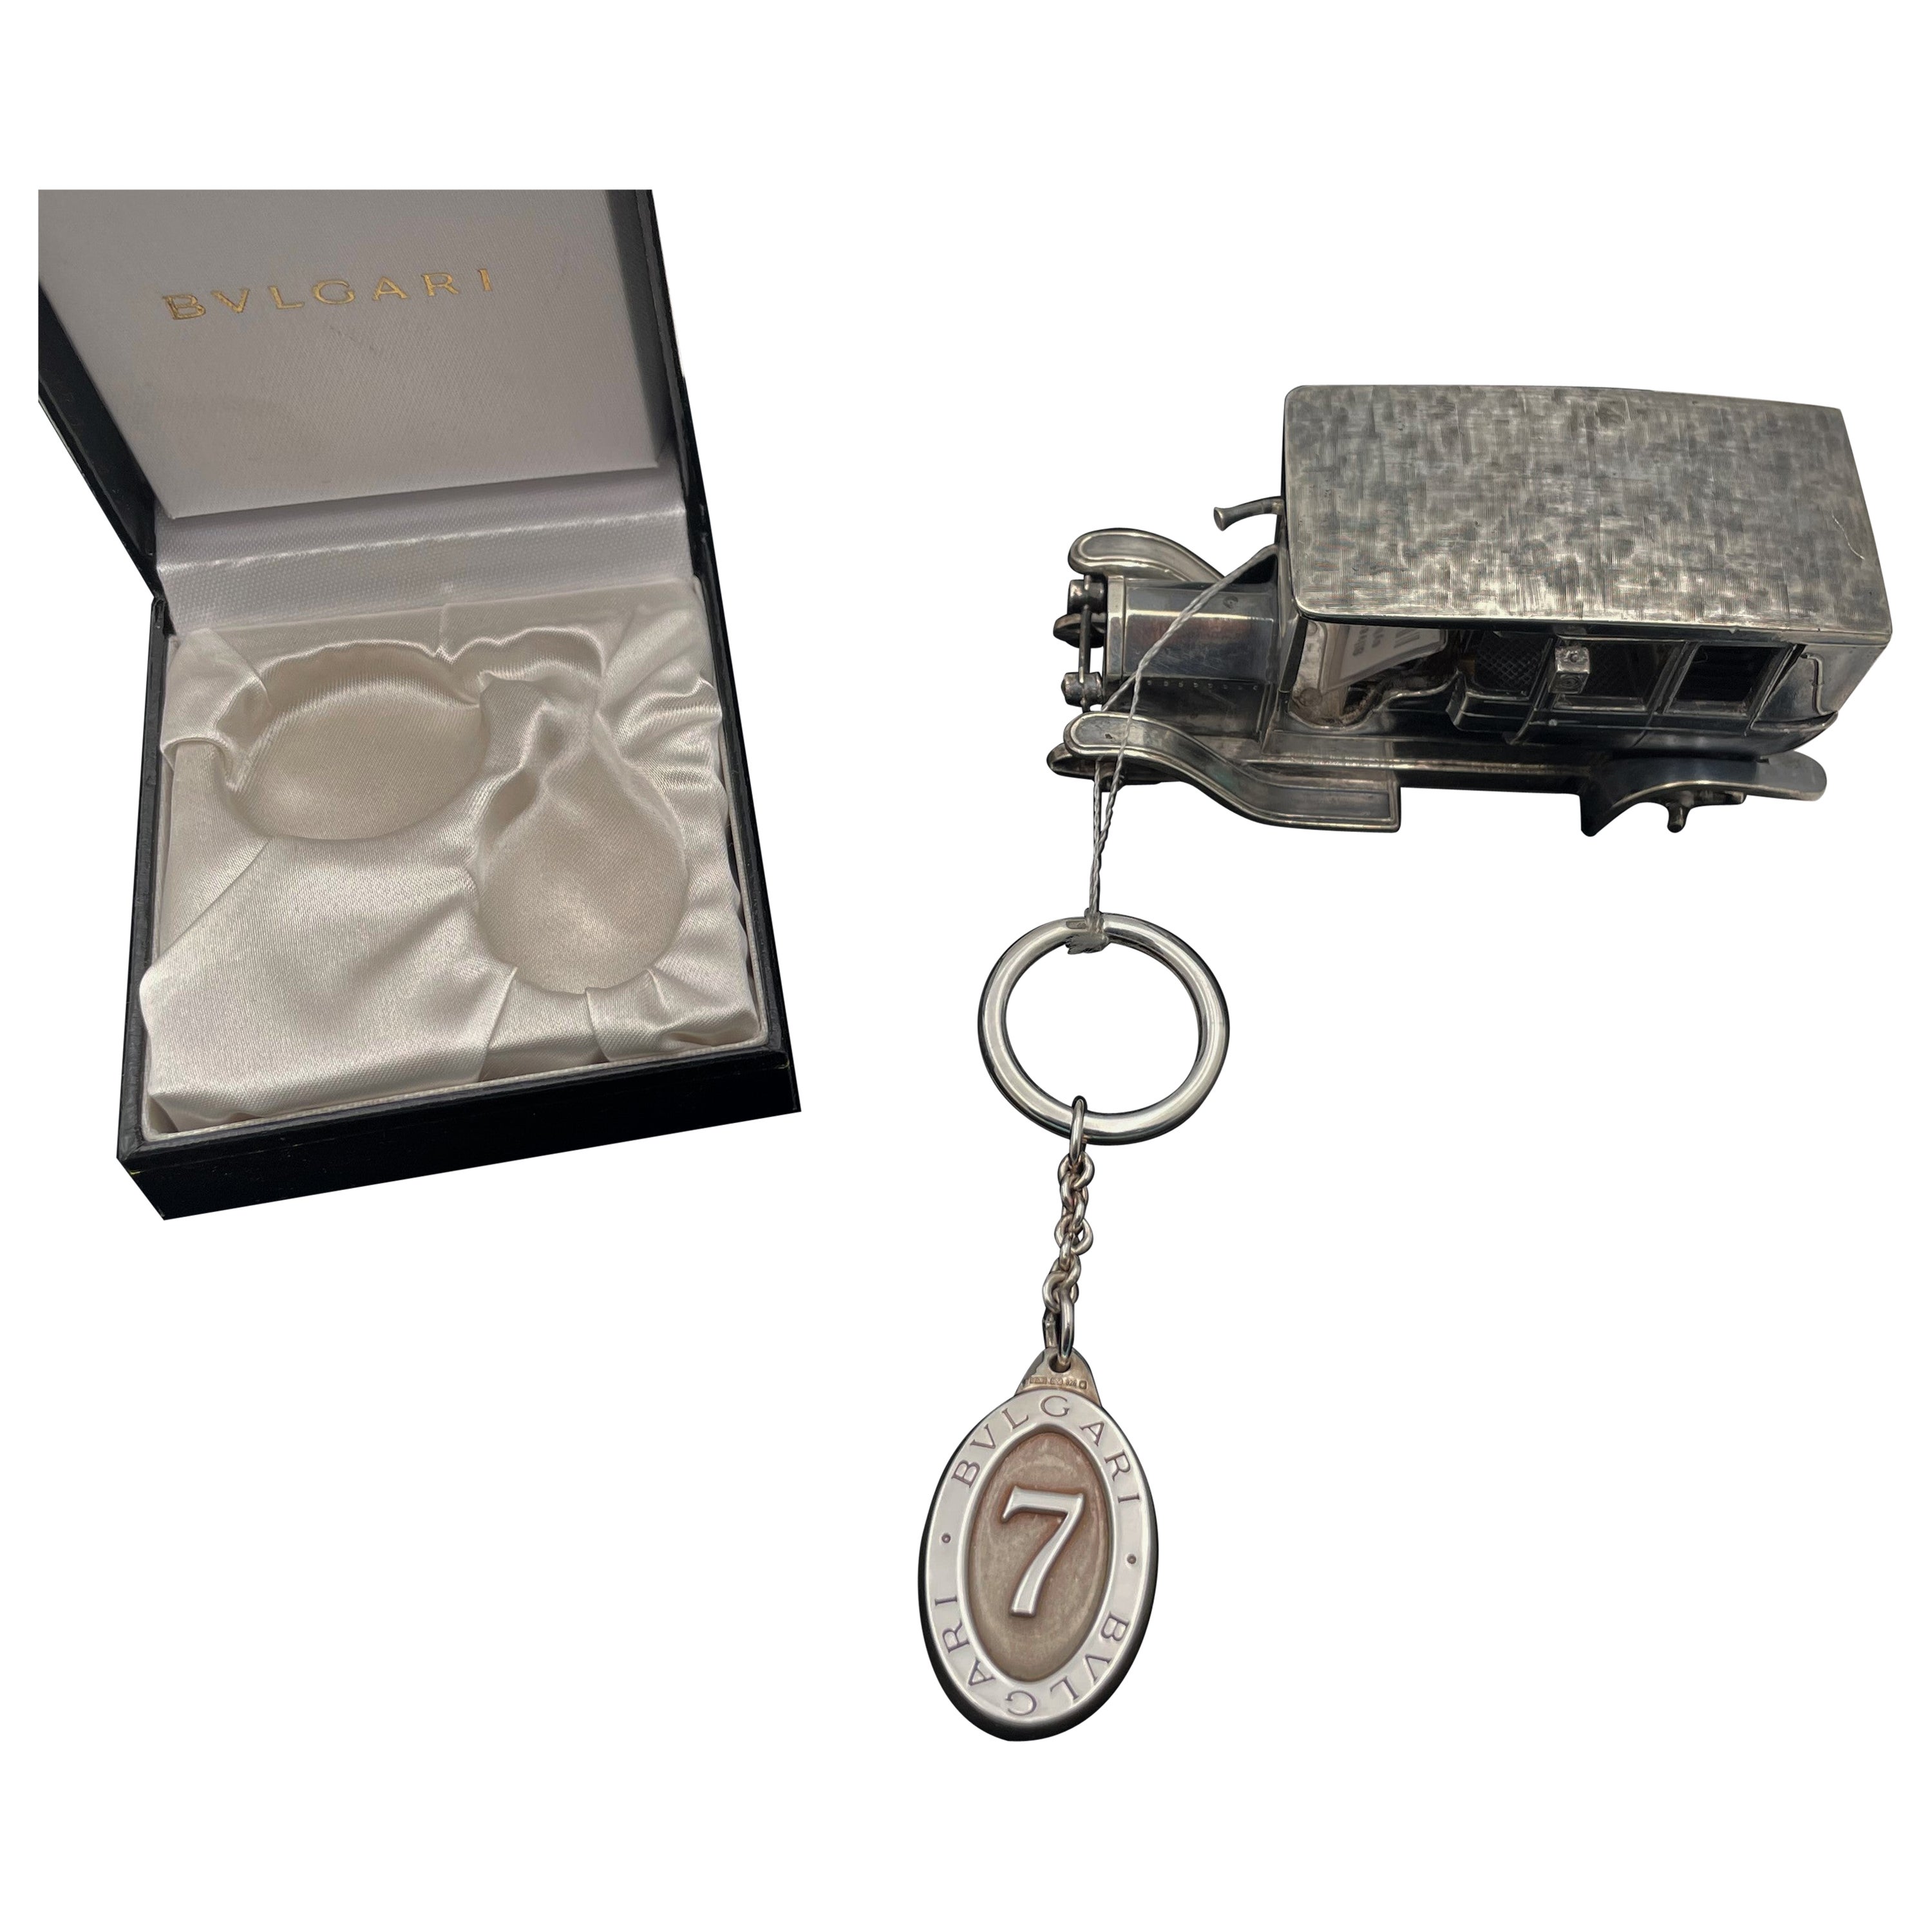 Bulgari Bvlgari Sterling Silver Lucky 7 Keychain New in Box For Sale